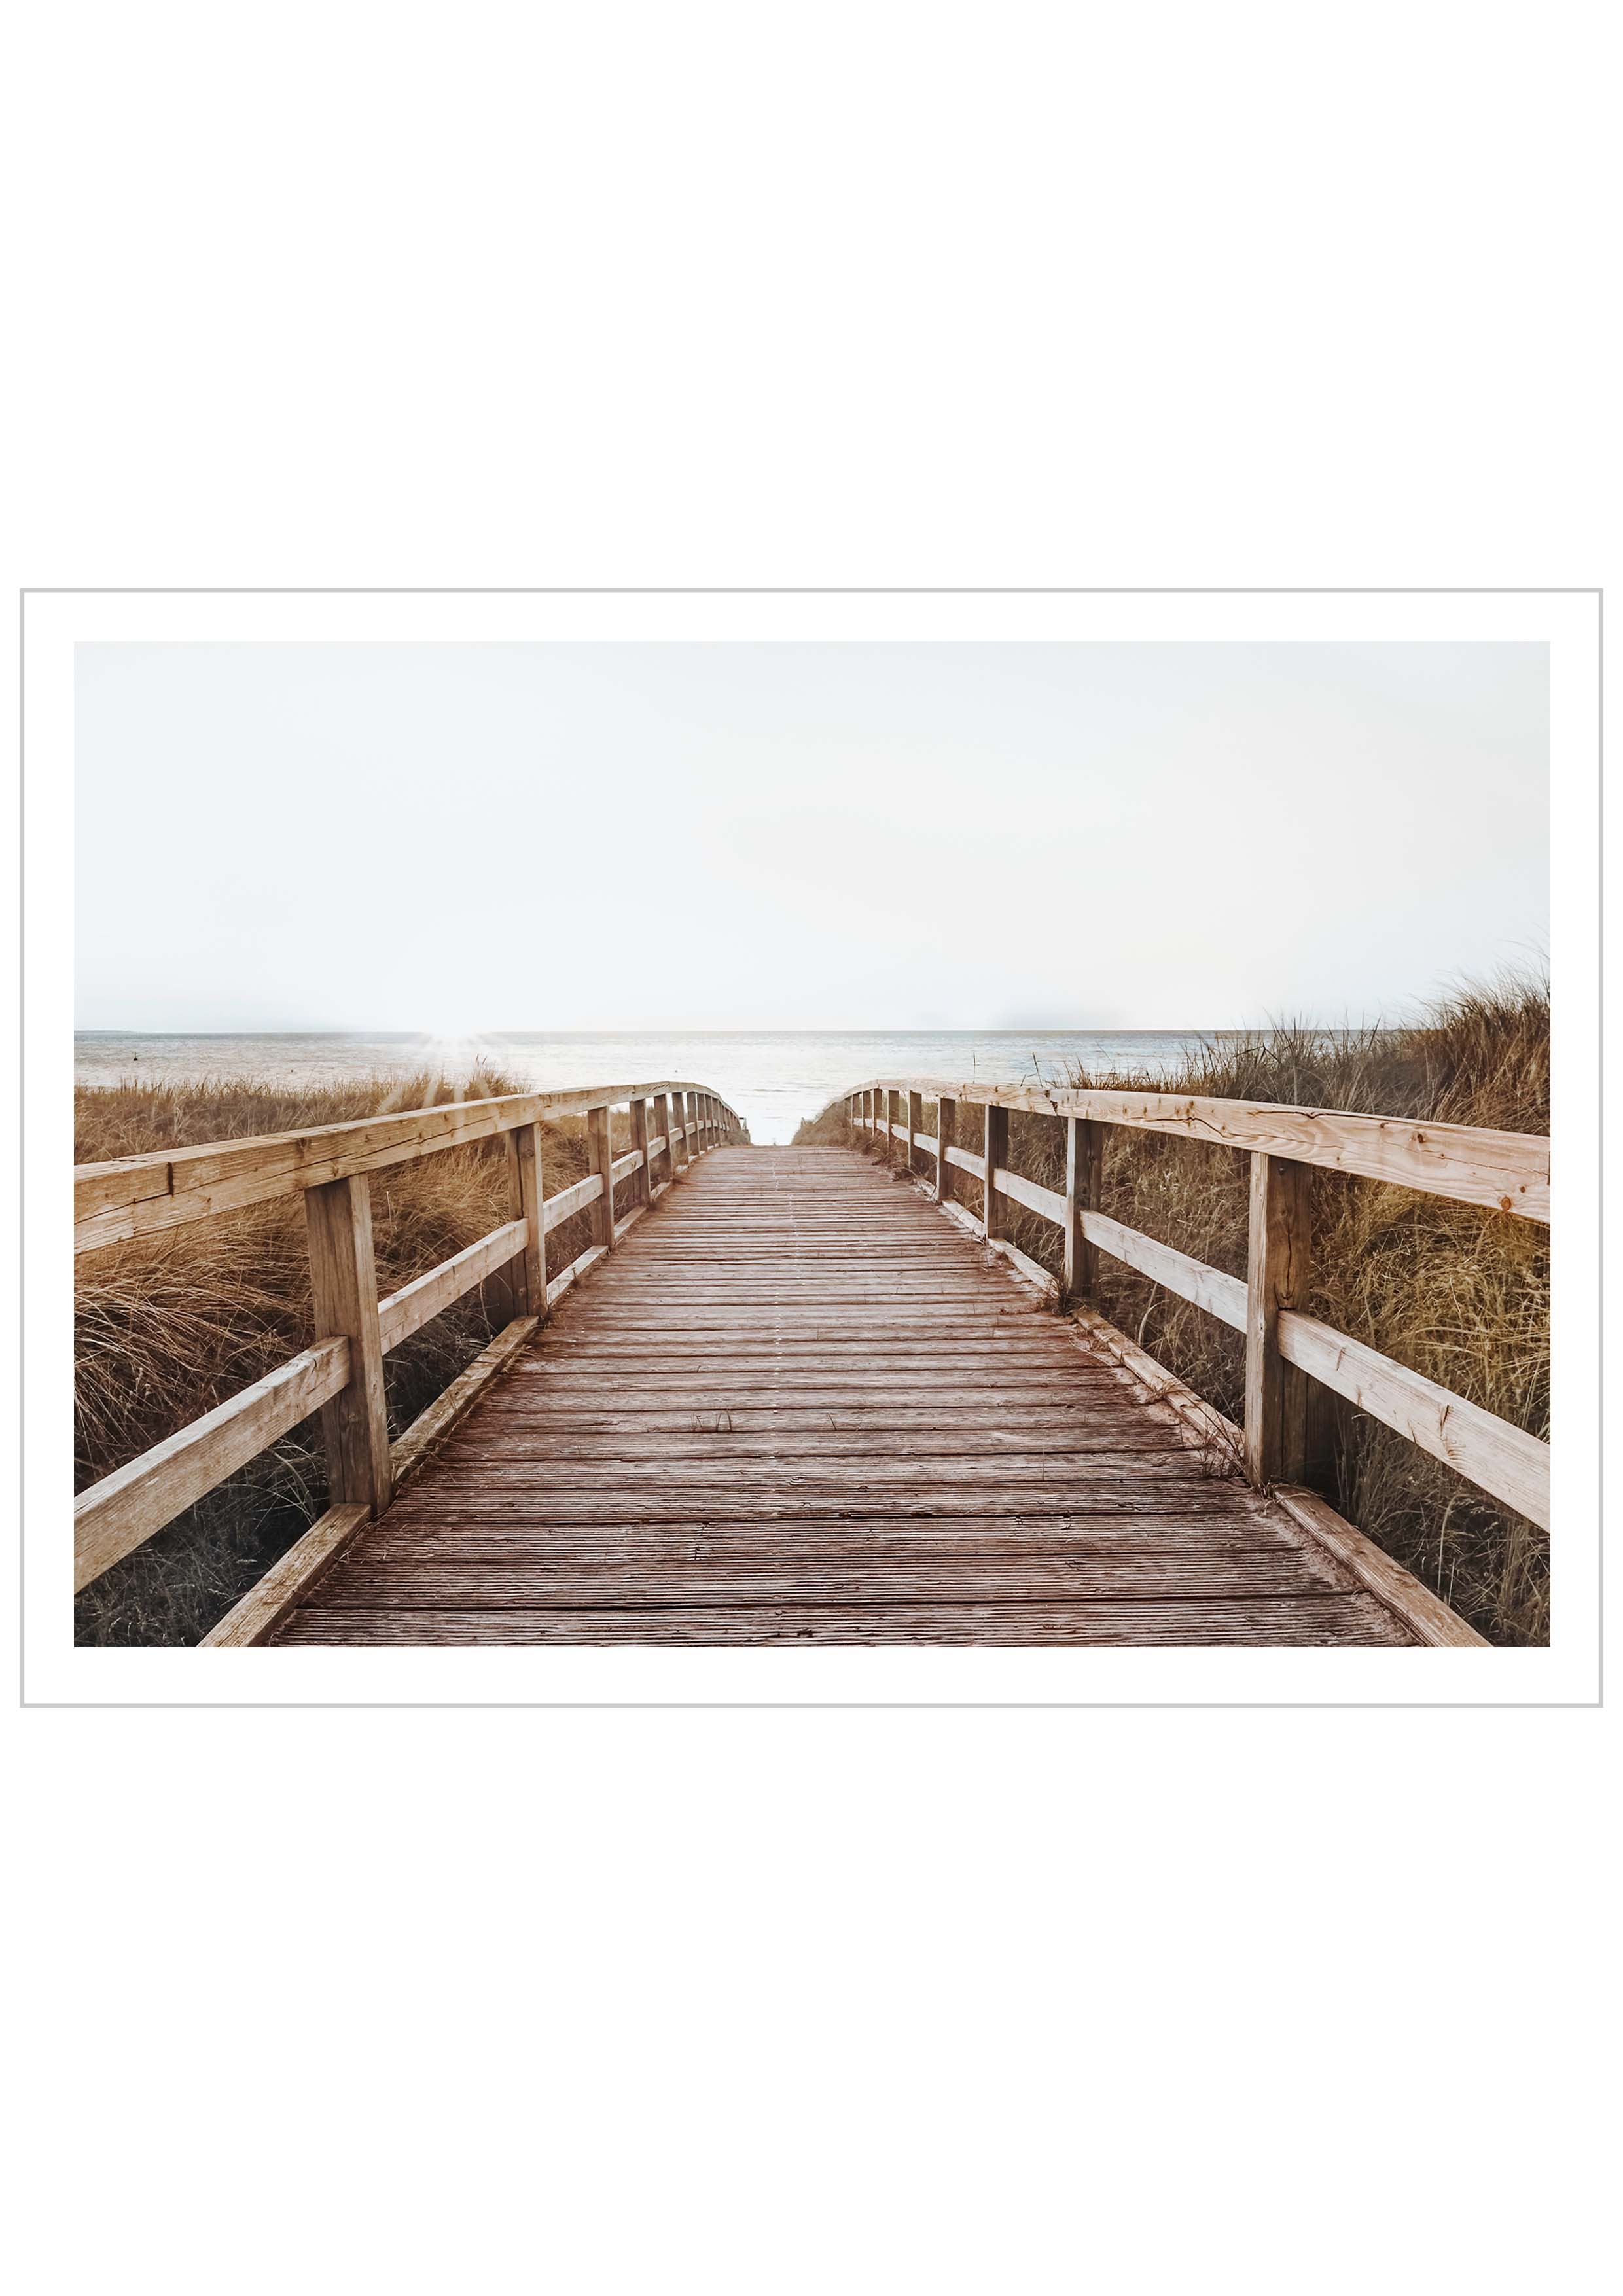 Photograph of a wooden path leads down to a beach and the calm ocean. The gentle sun rays give the photographic Poster a warm atmosphere.